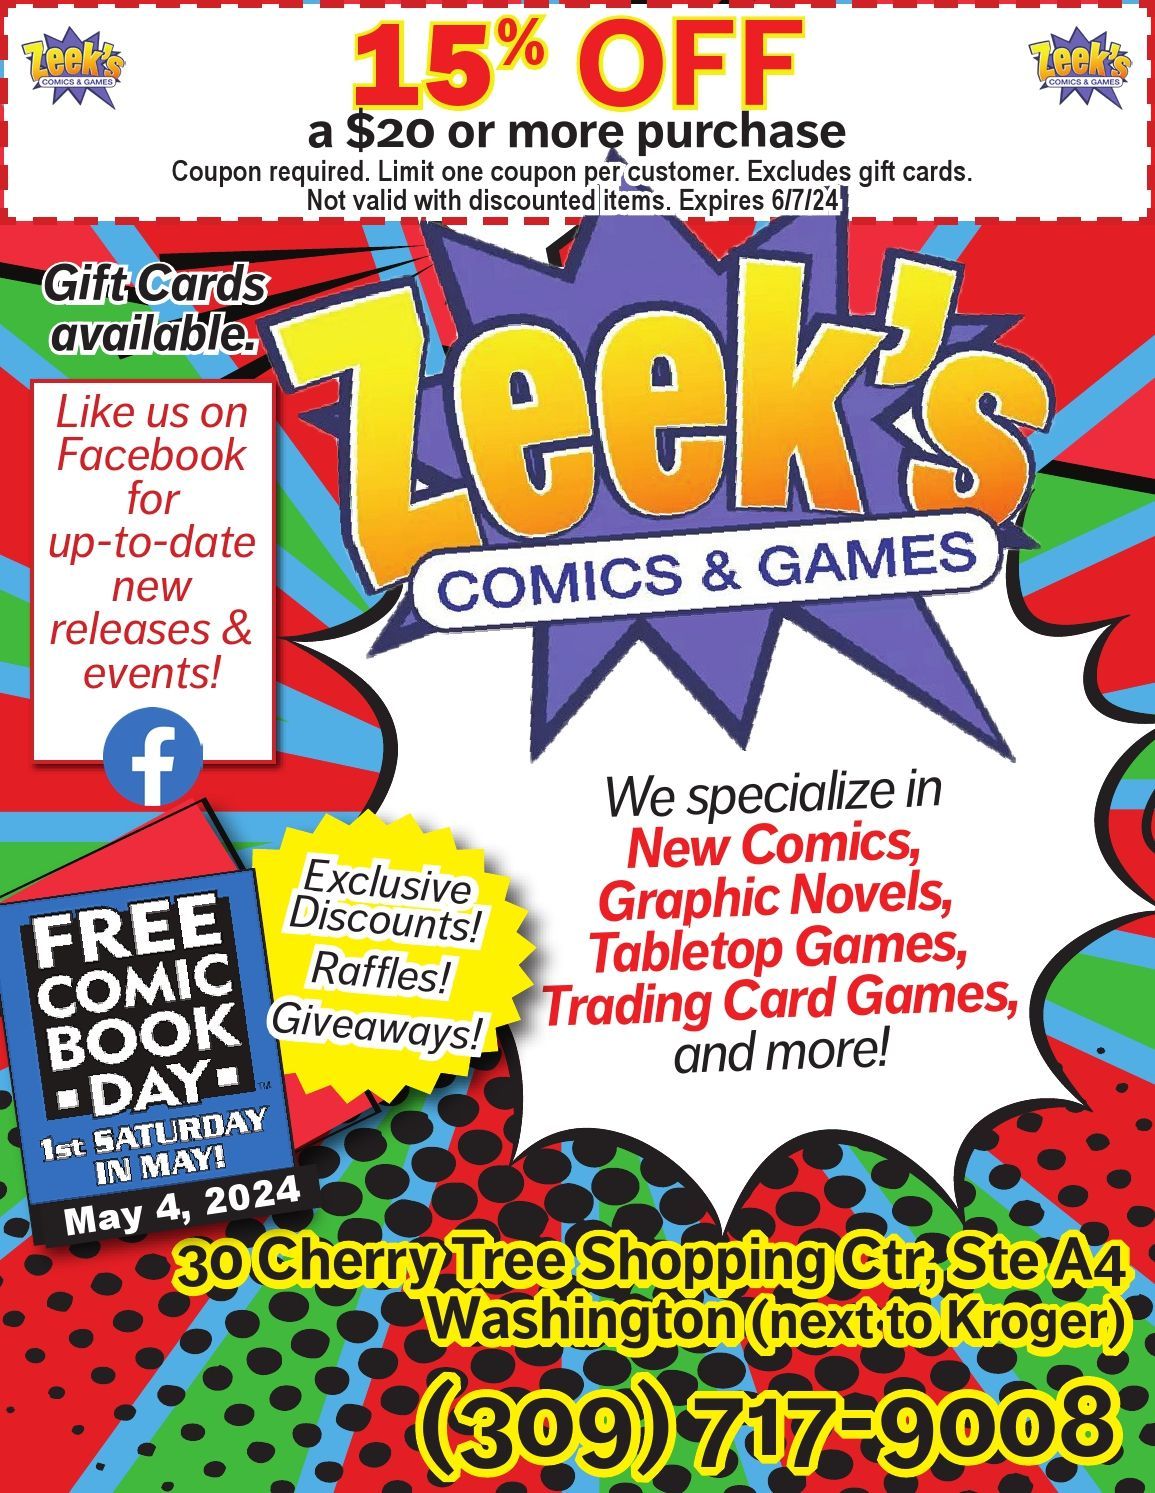 Zeeks Comics and Games coupon free comic book day in Washington, IL just 15 minutes from Peoria!